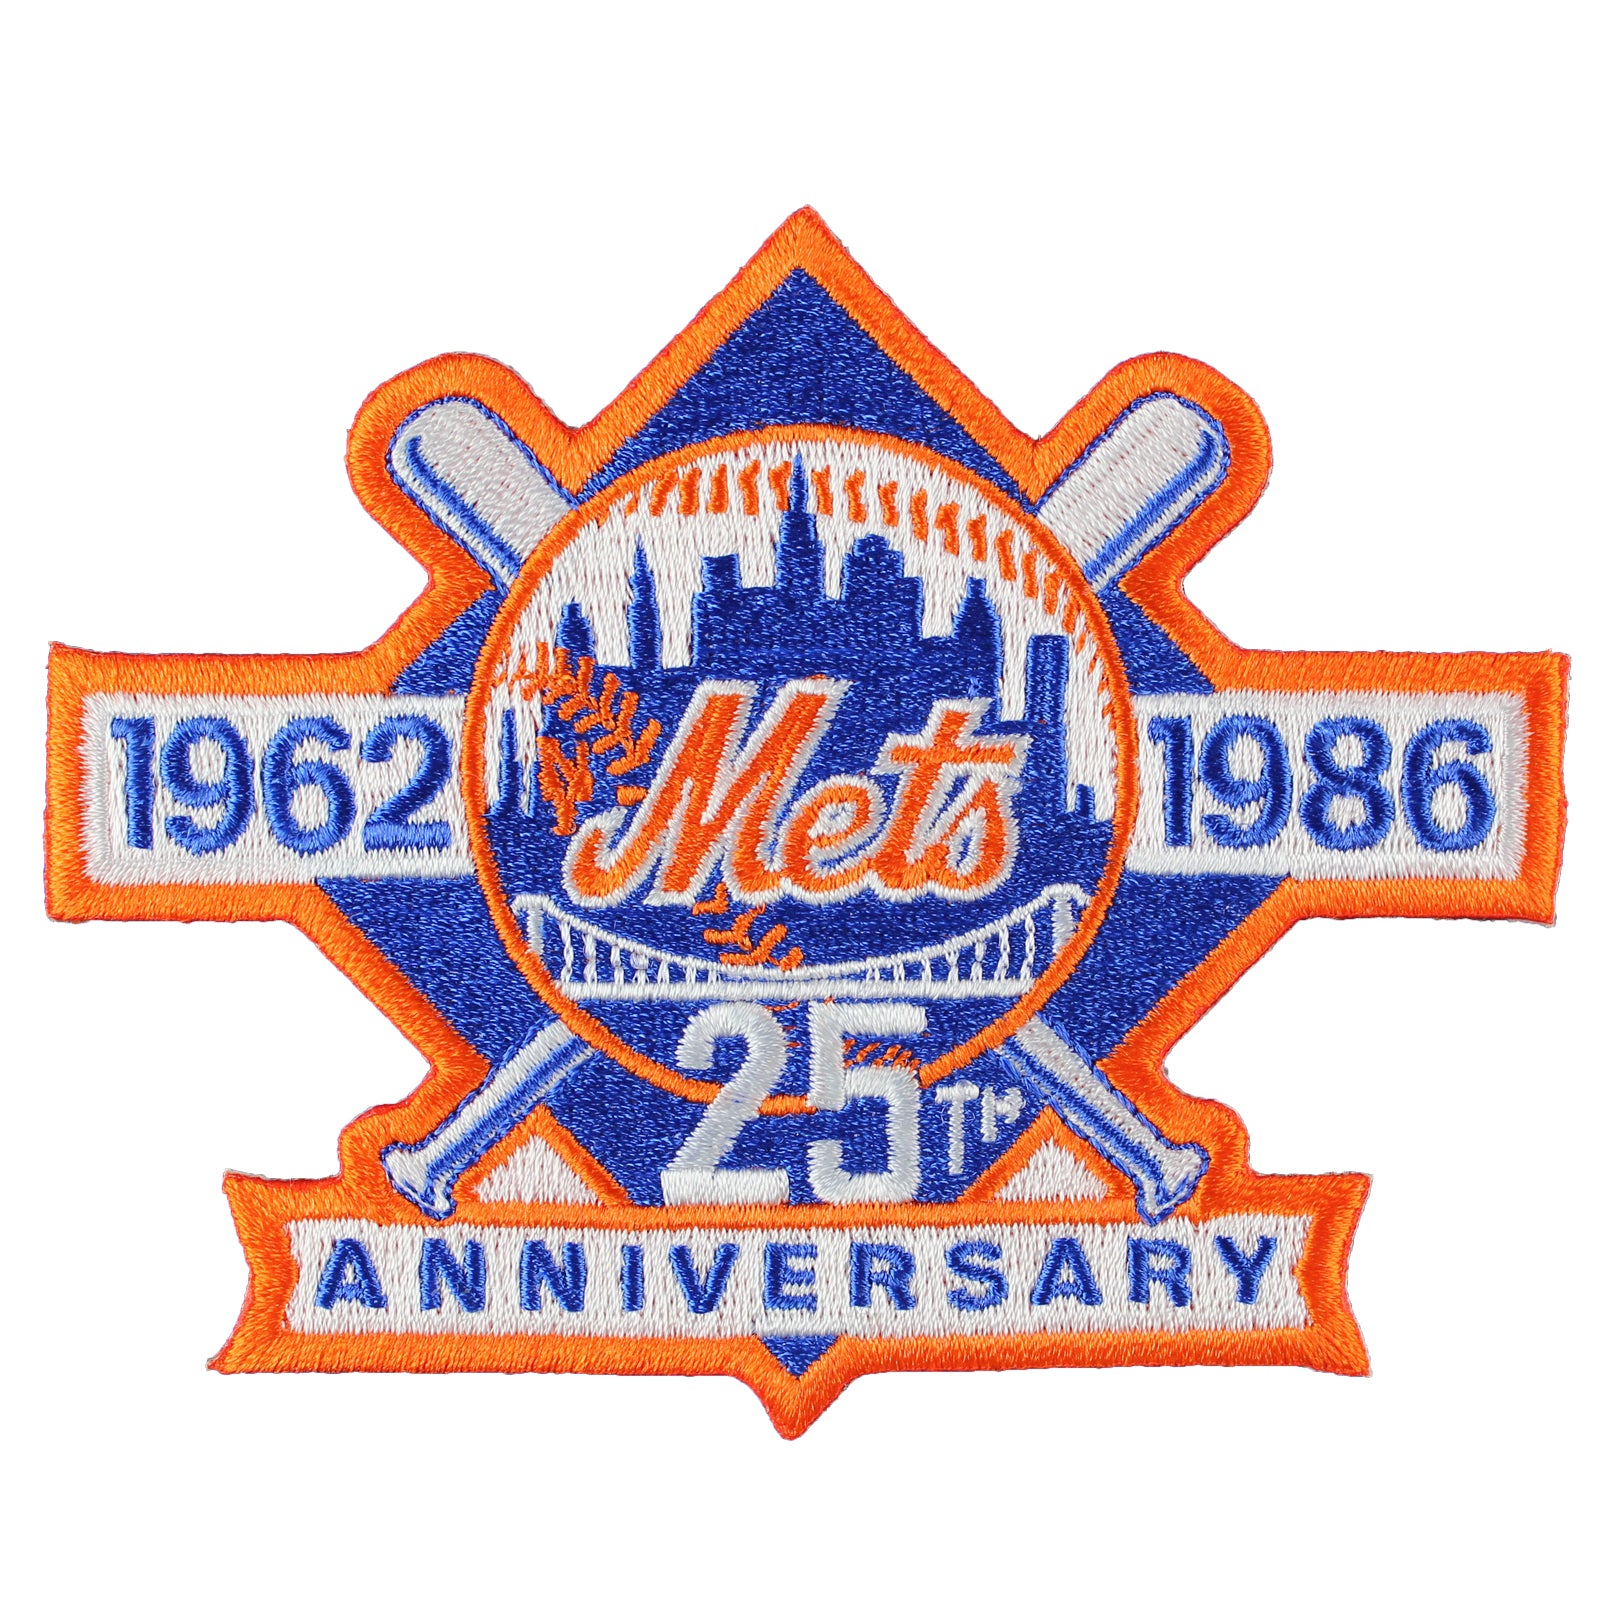 Metsmerized Online on X: The Mets have updated the sponsor patch